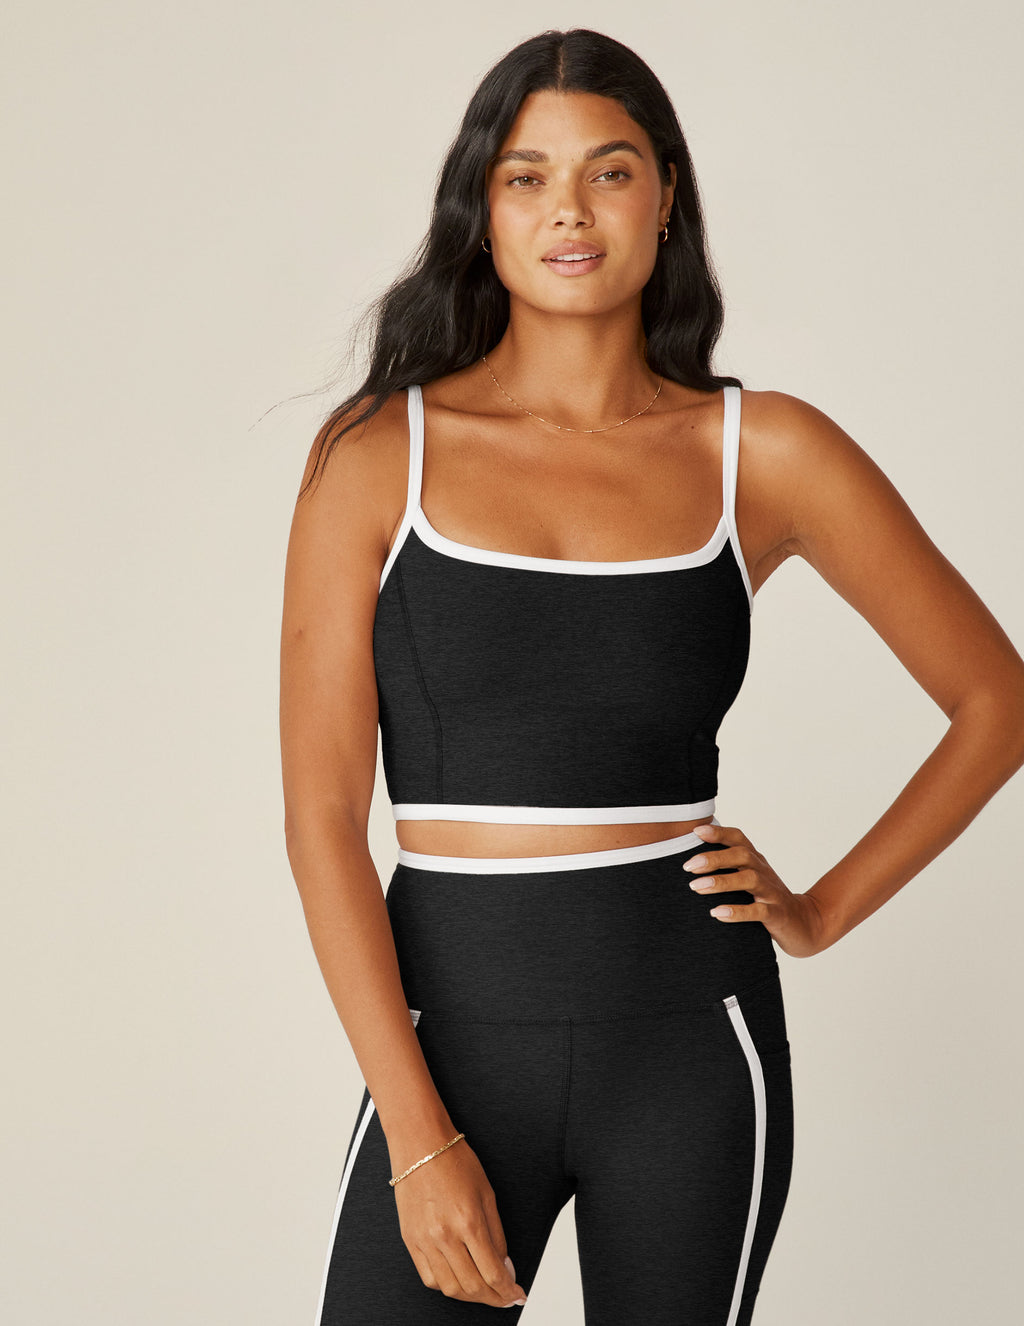 ARRIVE GUIDE ARRIVE gUIDE Workout crop Tops for Women cute Loose Fit Tank  Tops casual Summer Yoga Athletic Sports Tanks cinched Waist cropped